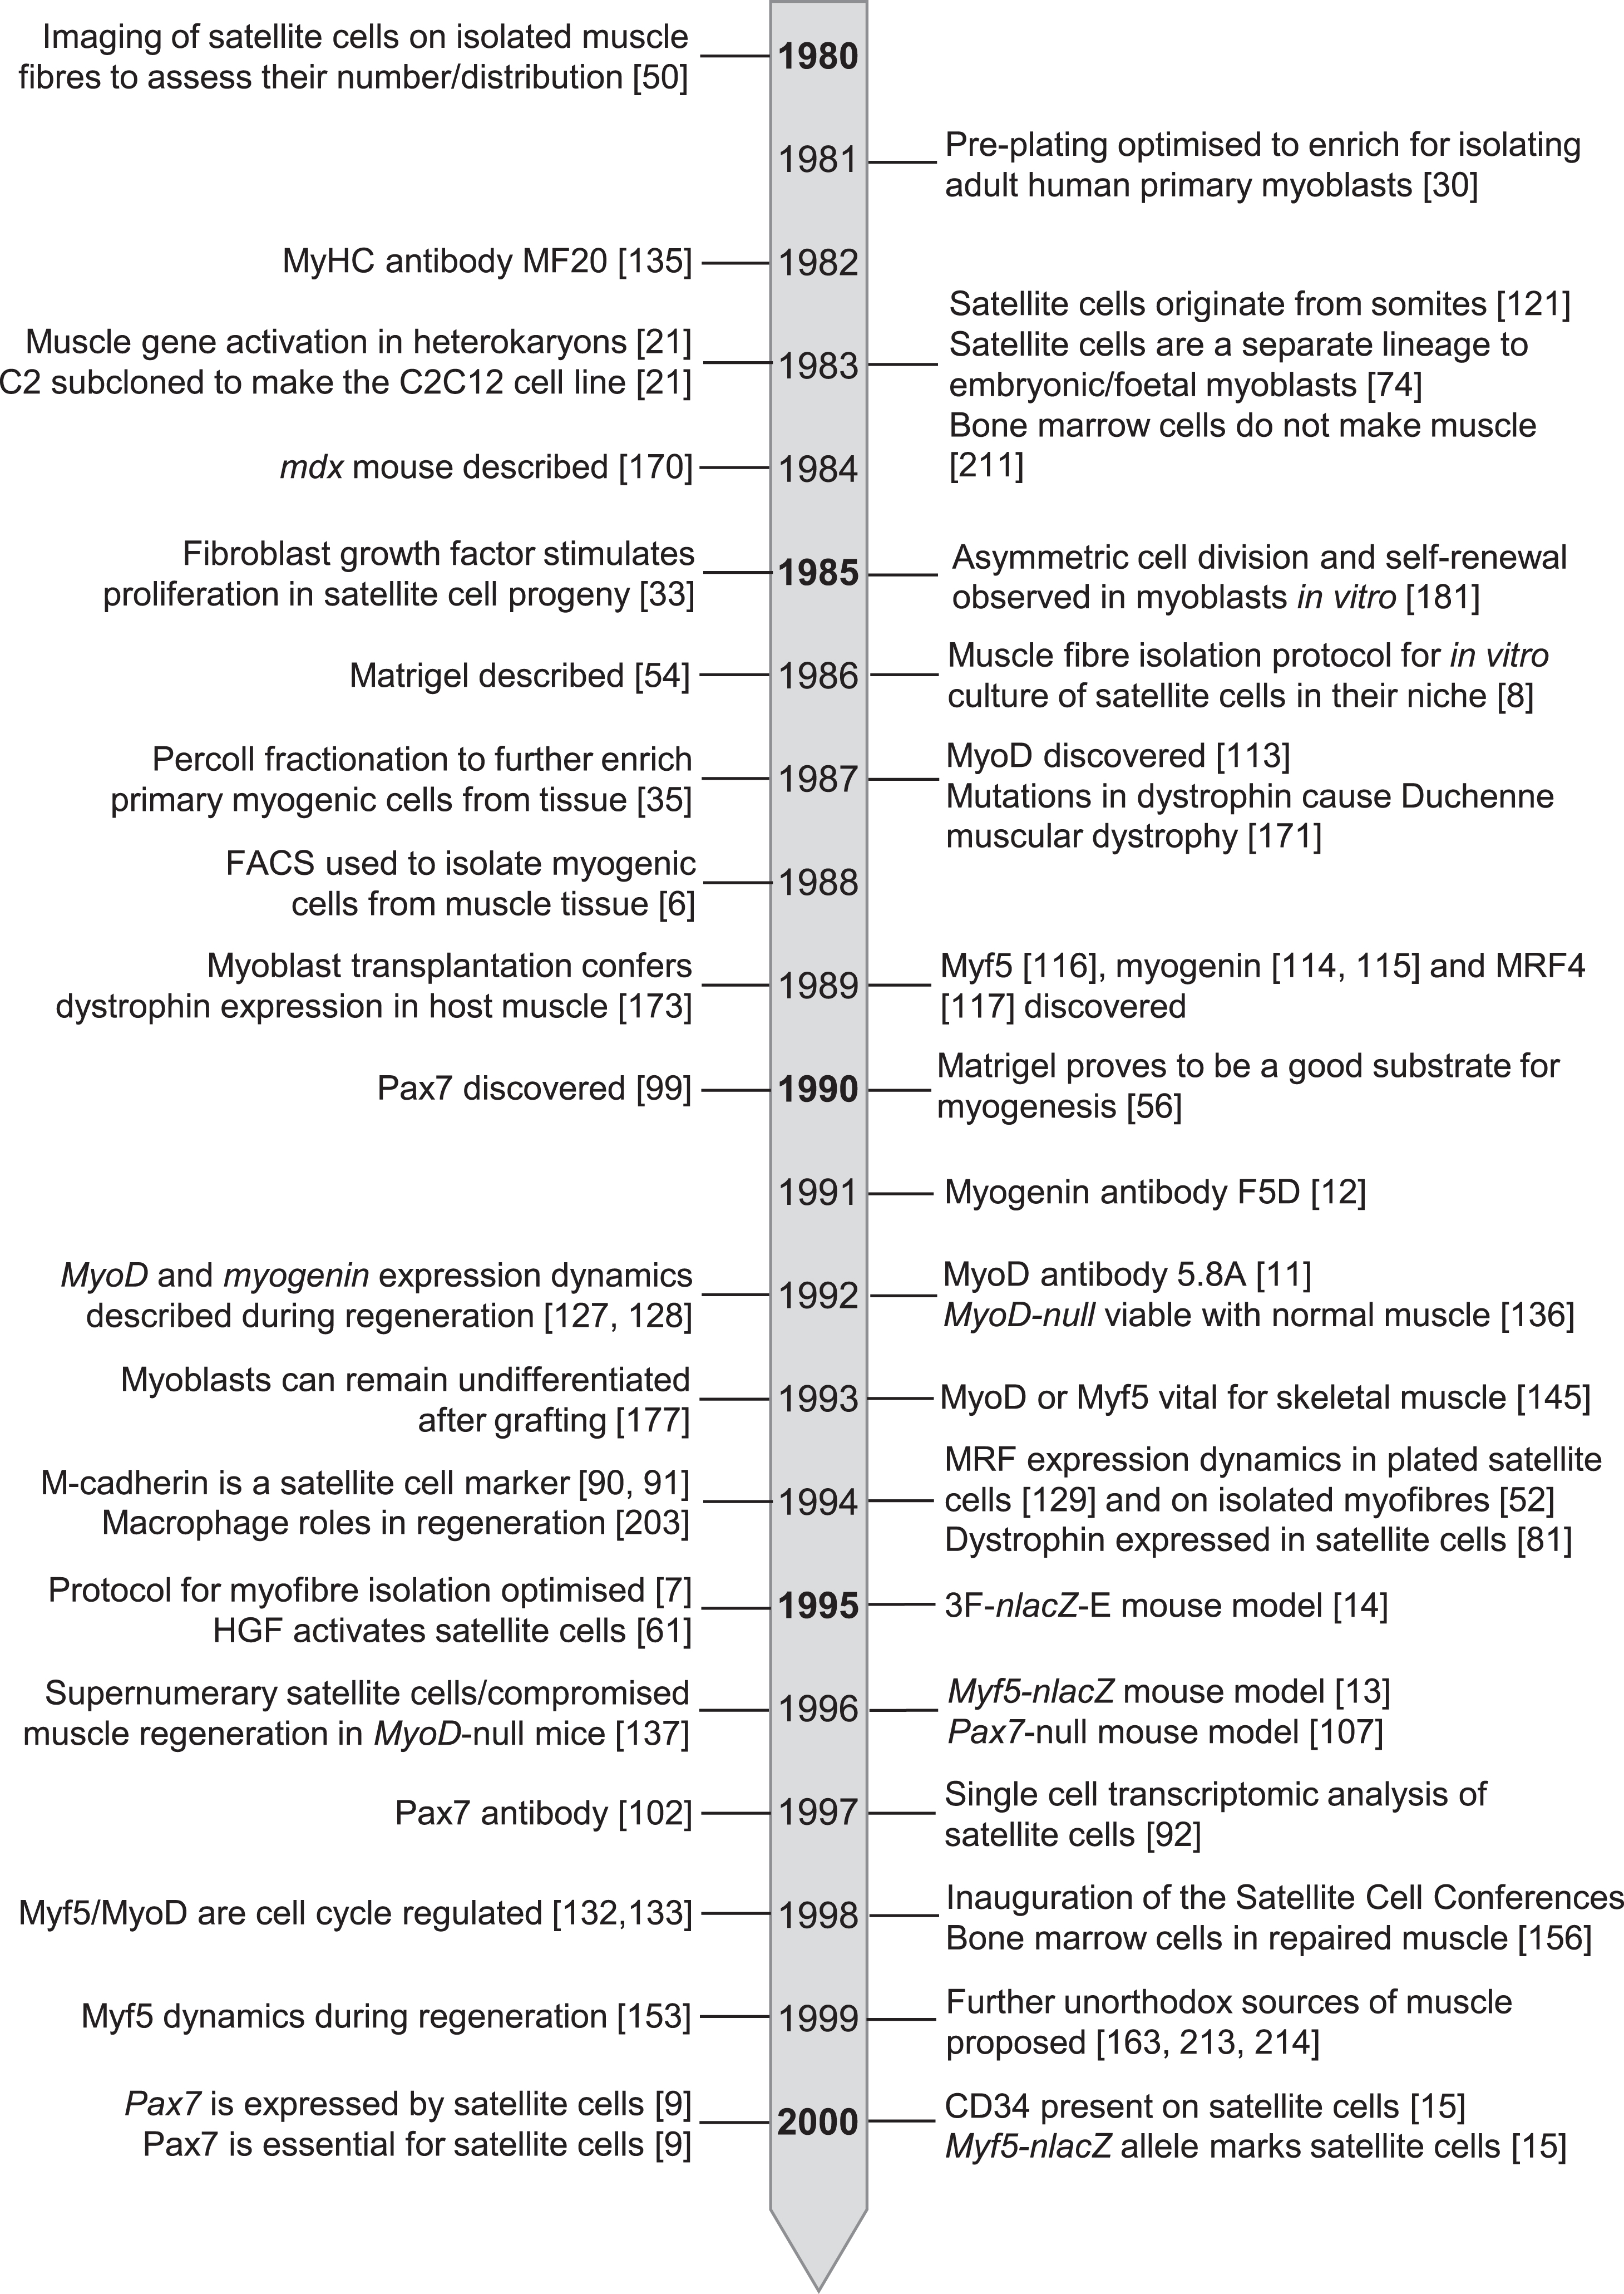 Timeline of seminal events in satellite cell research from 1980 – 2000.